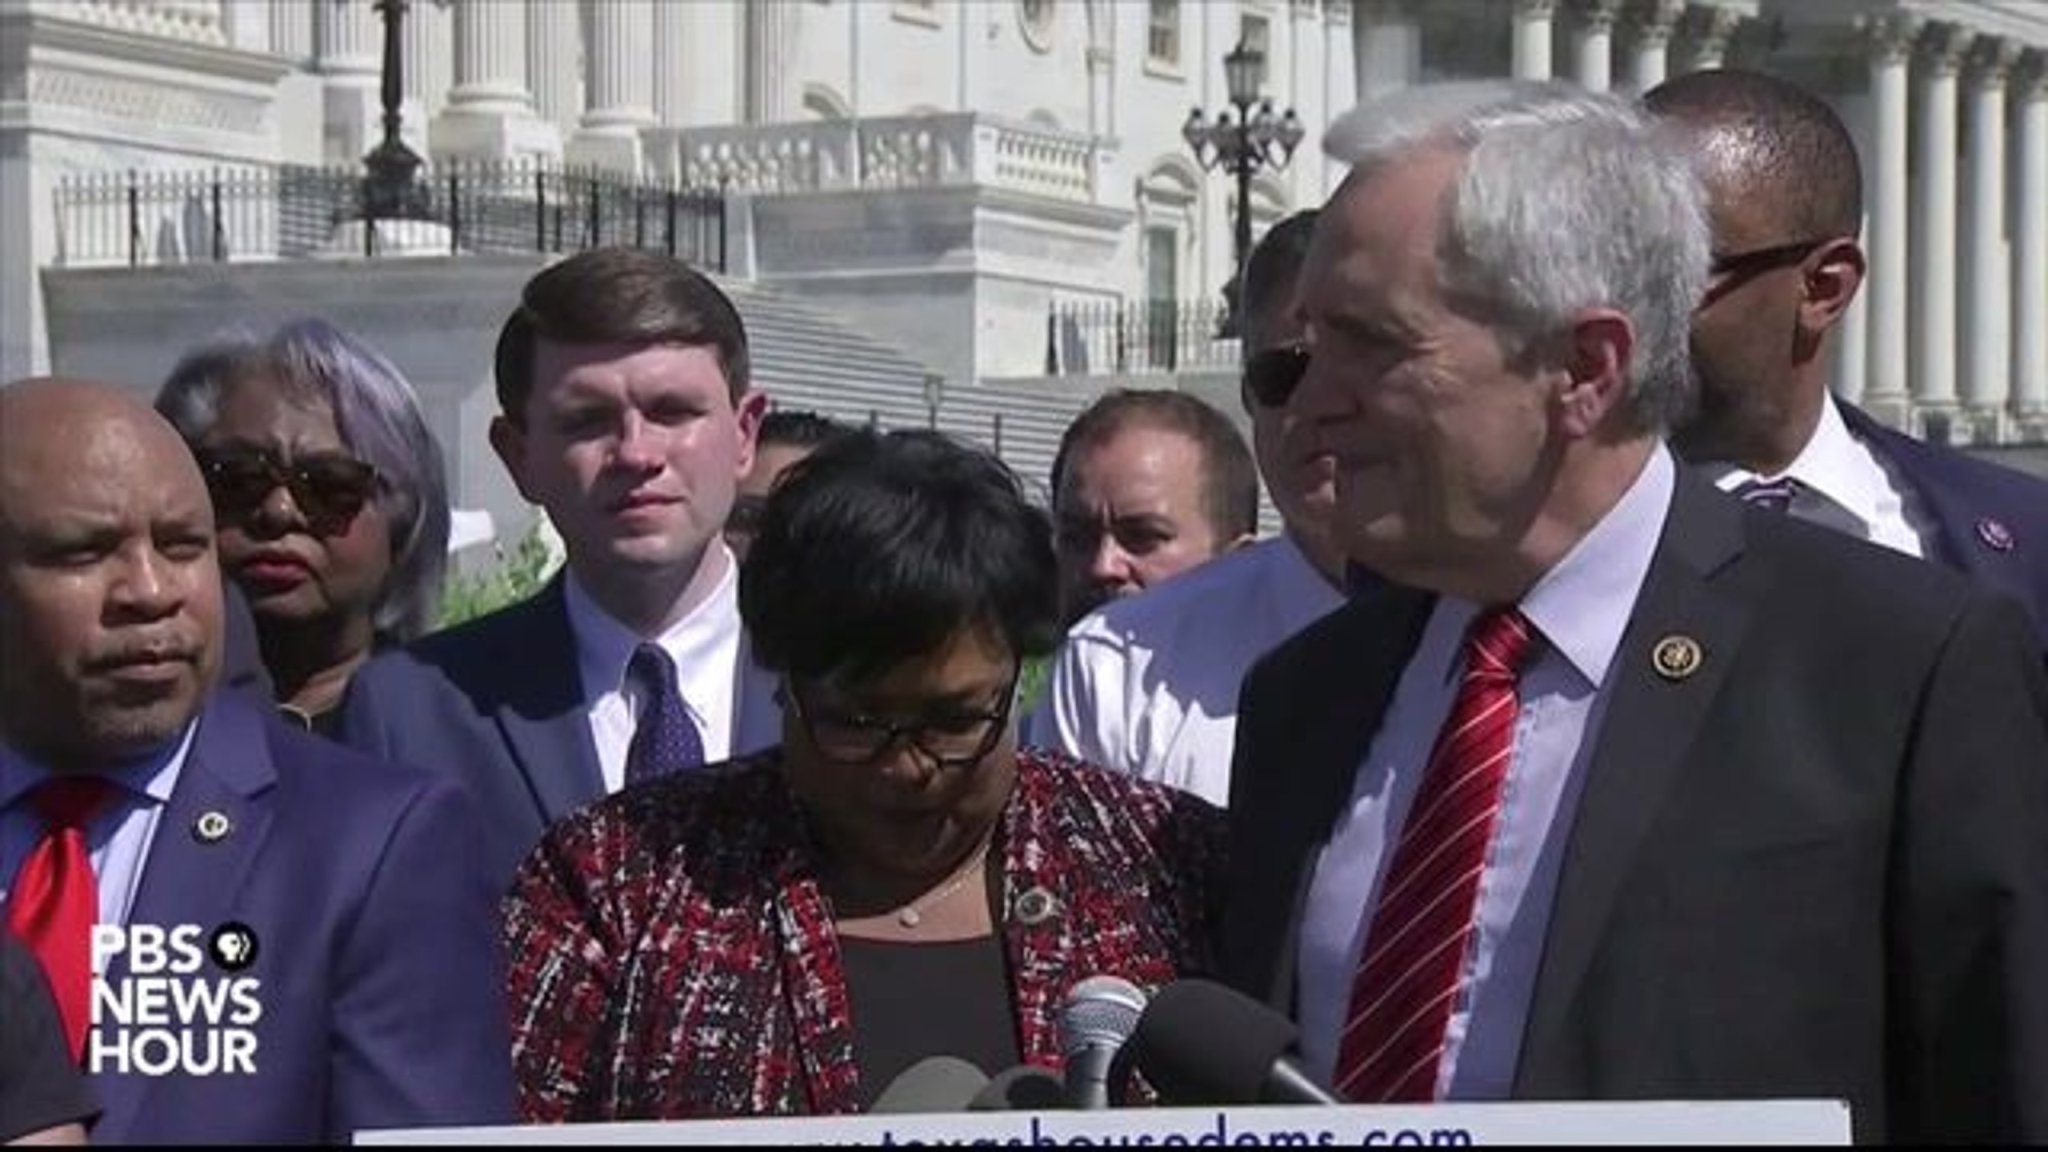 Texas State Democrats sing ‘We Shall Overcome’ in a press conference urging Congress to pass voting rights legislation.